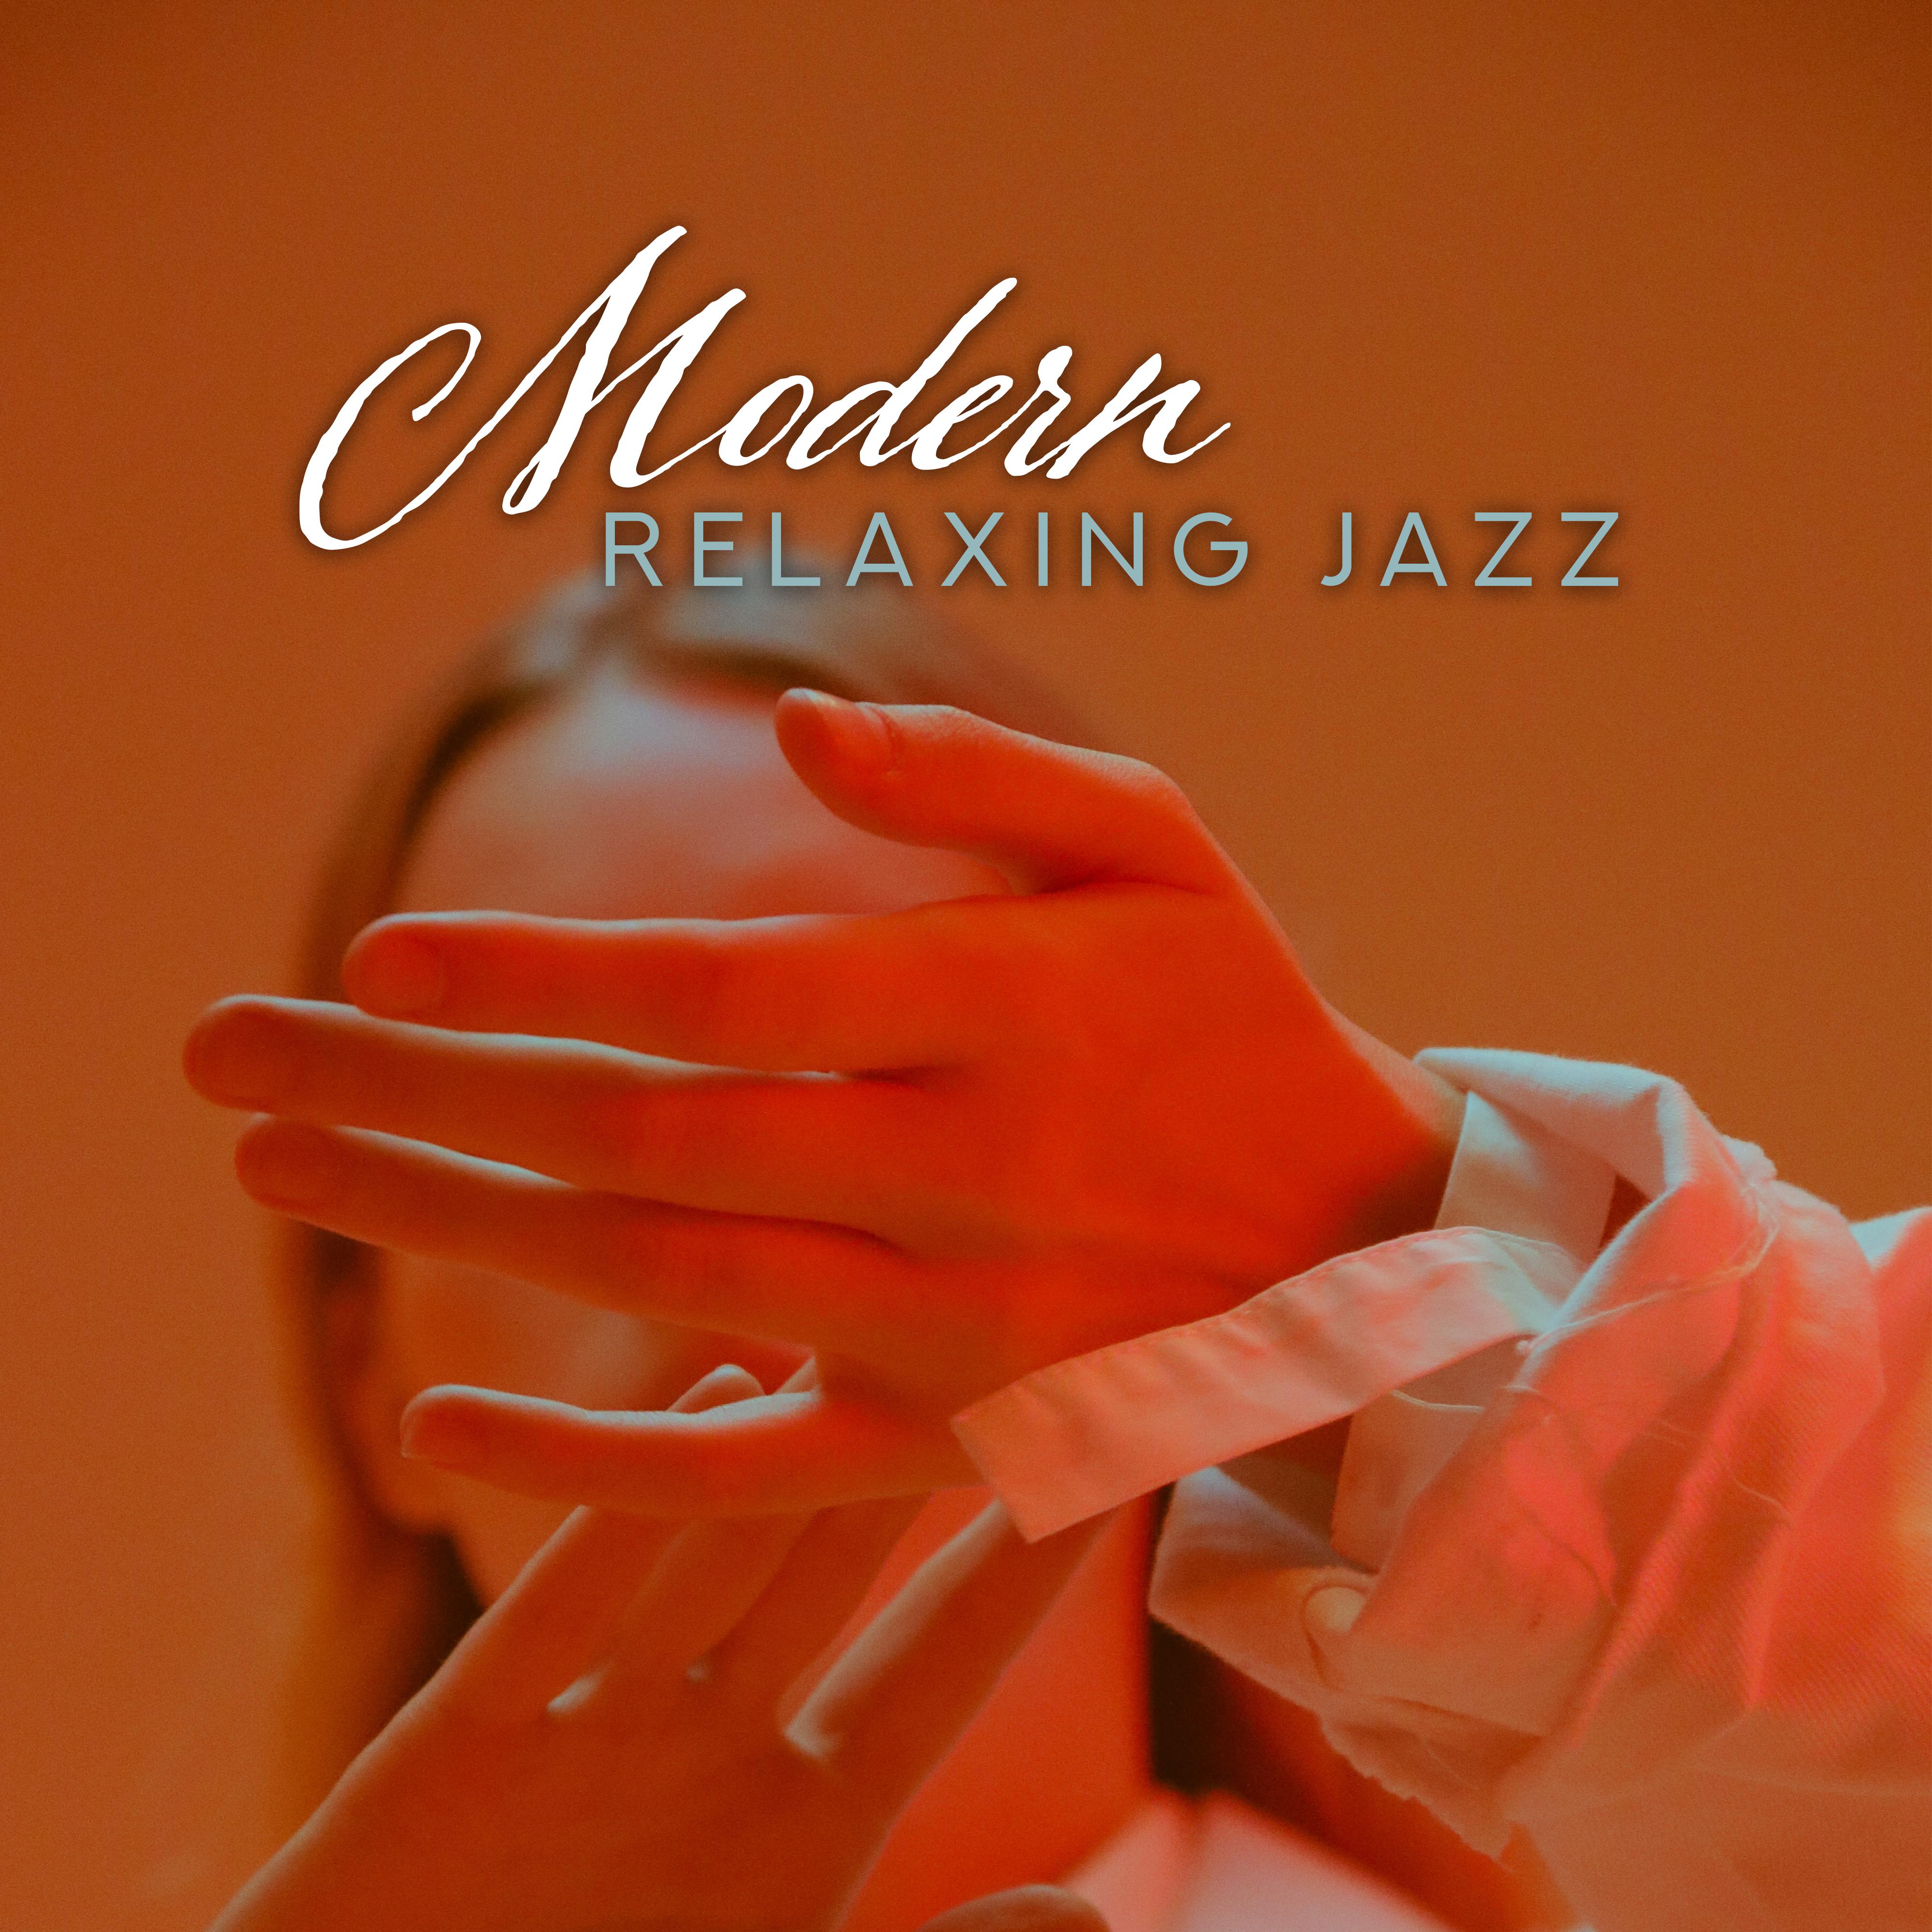 Modern Relaxing Jazz  15 Jazz Collection for Relaxation, Gentle Jazz for Restaurant, Coffee Music, Jazz Lounge, Instrumental Jazz Music Ambient